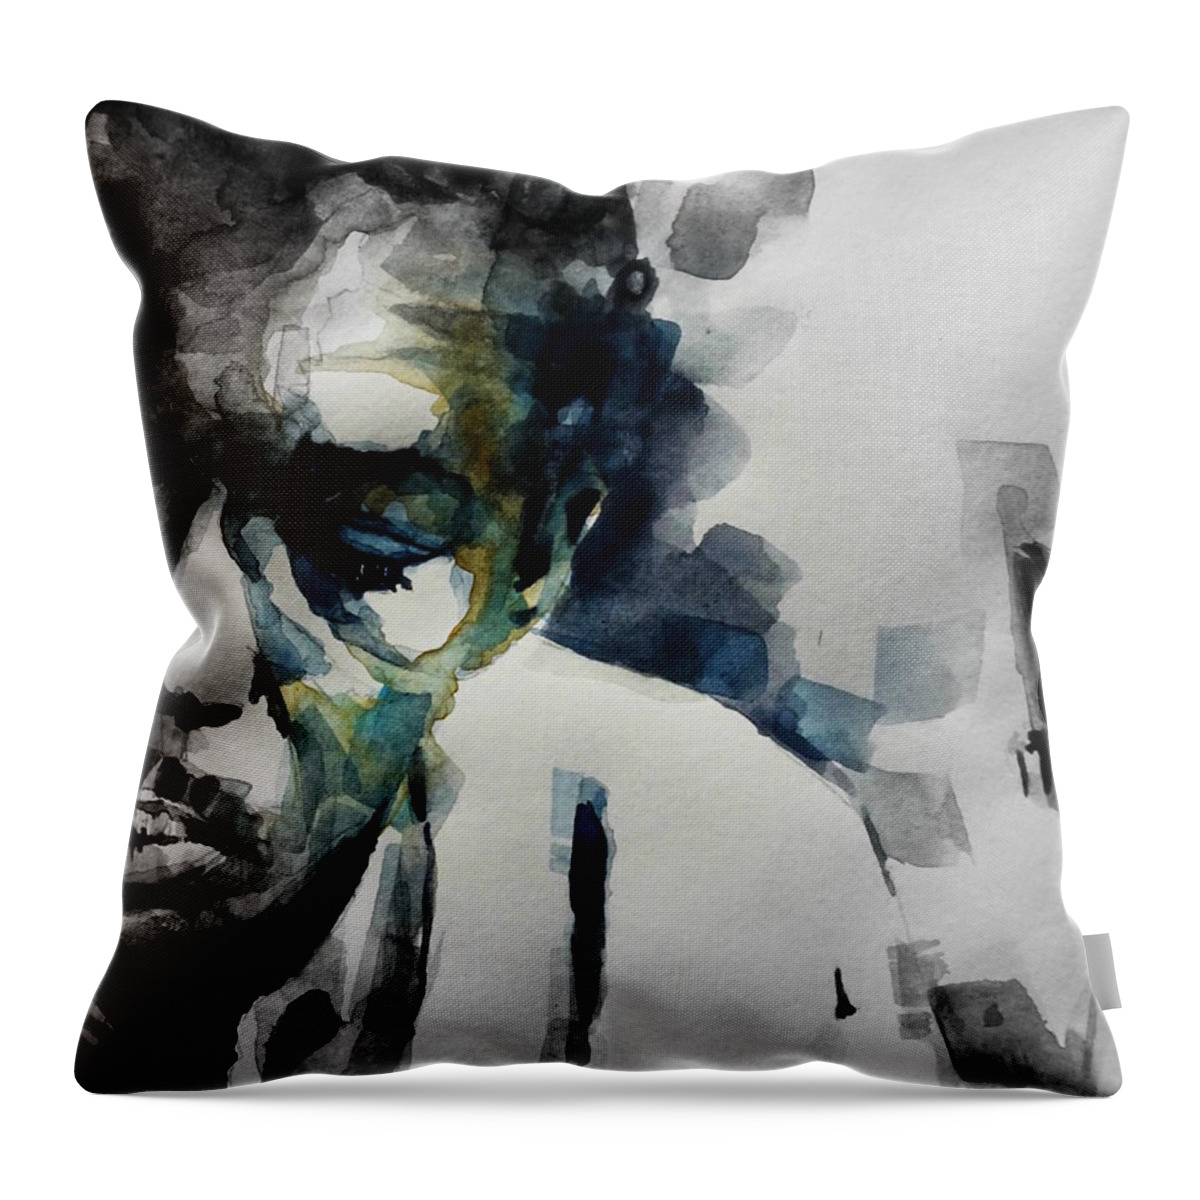 John Coltrane Throw Pillow featuring the painting Lush Life John Coltrane by Paul Lovering